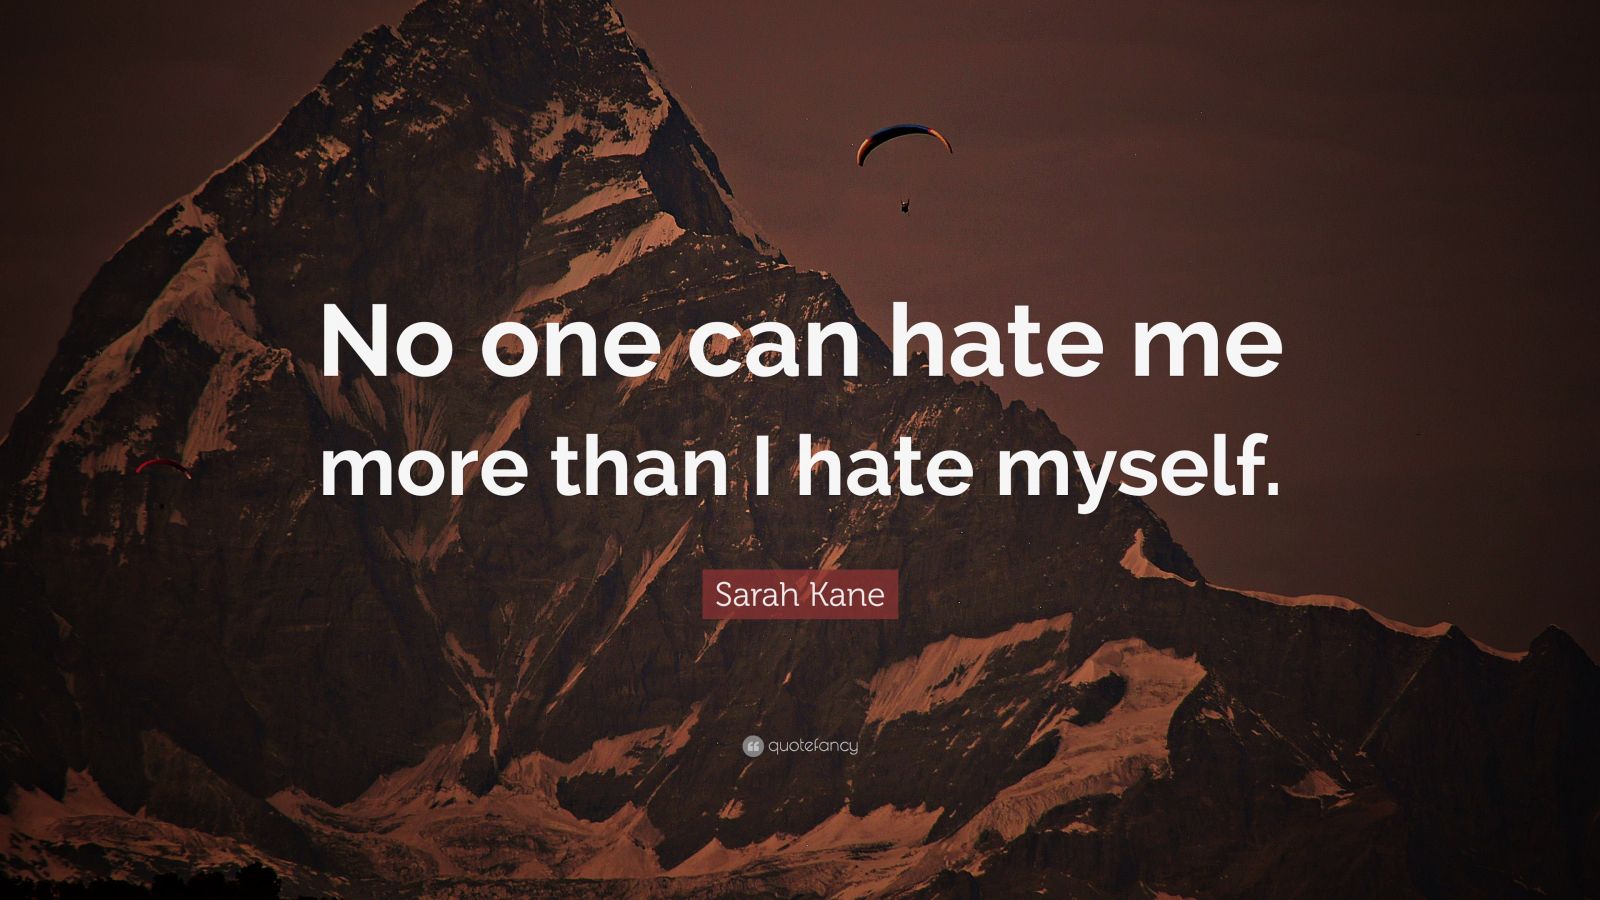 Sarah Kane Quote: “No one can hate me more than I hate myself.”